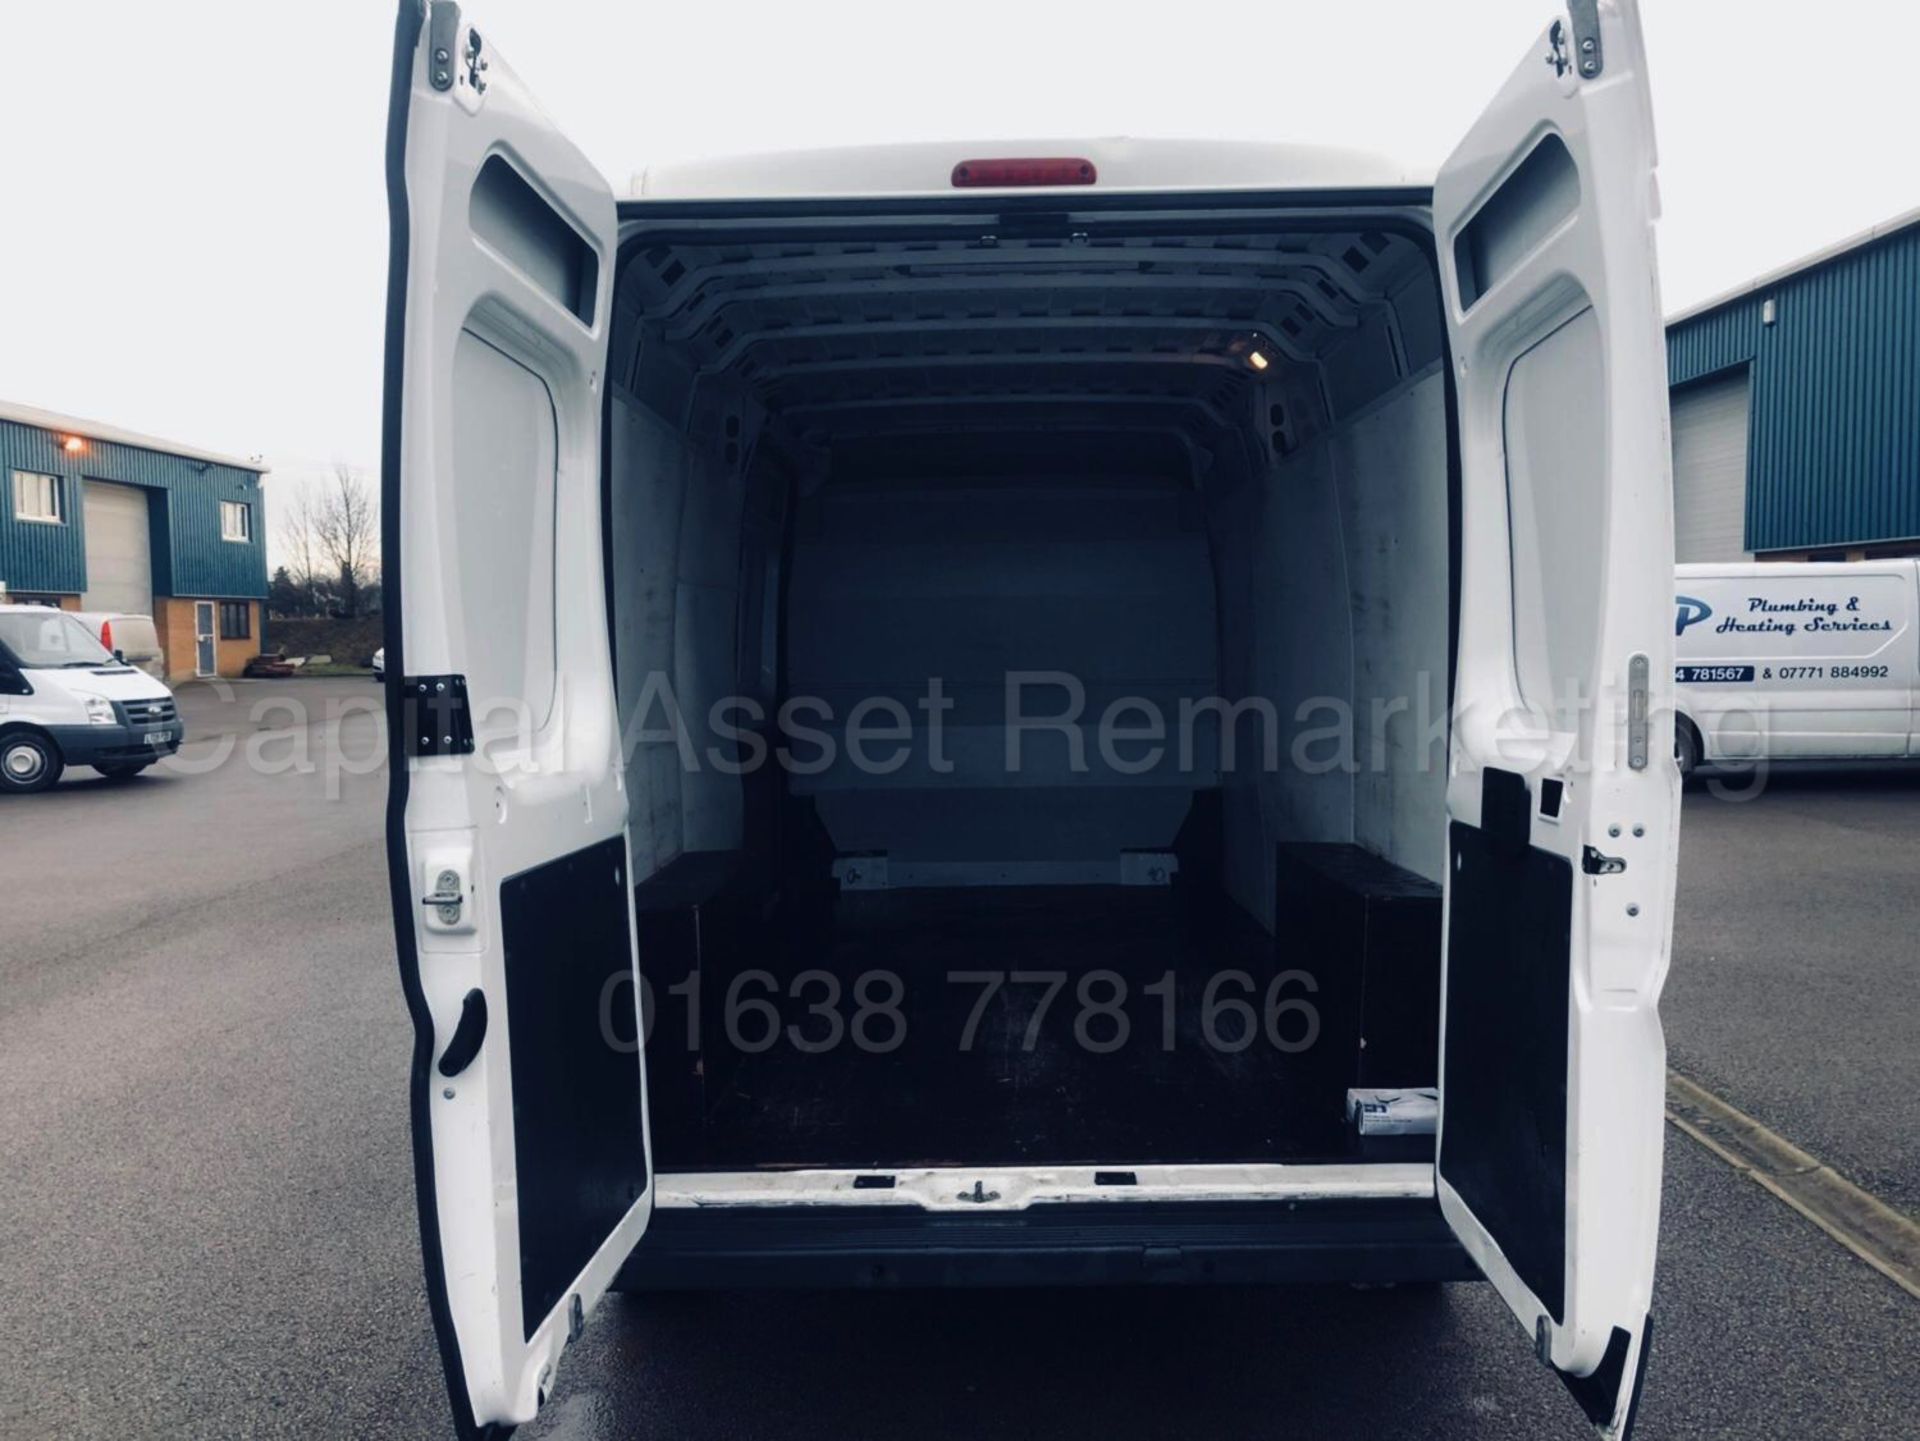 CITREON RELAY 35 'LWB HI-ROOF' (2012 - 12 REG) '2.2 HDI - 130 BHP - 6 SPEED' **ELECTRIC PACK** - Image 13 of 20